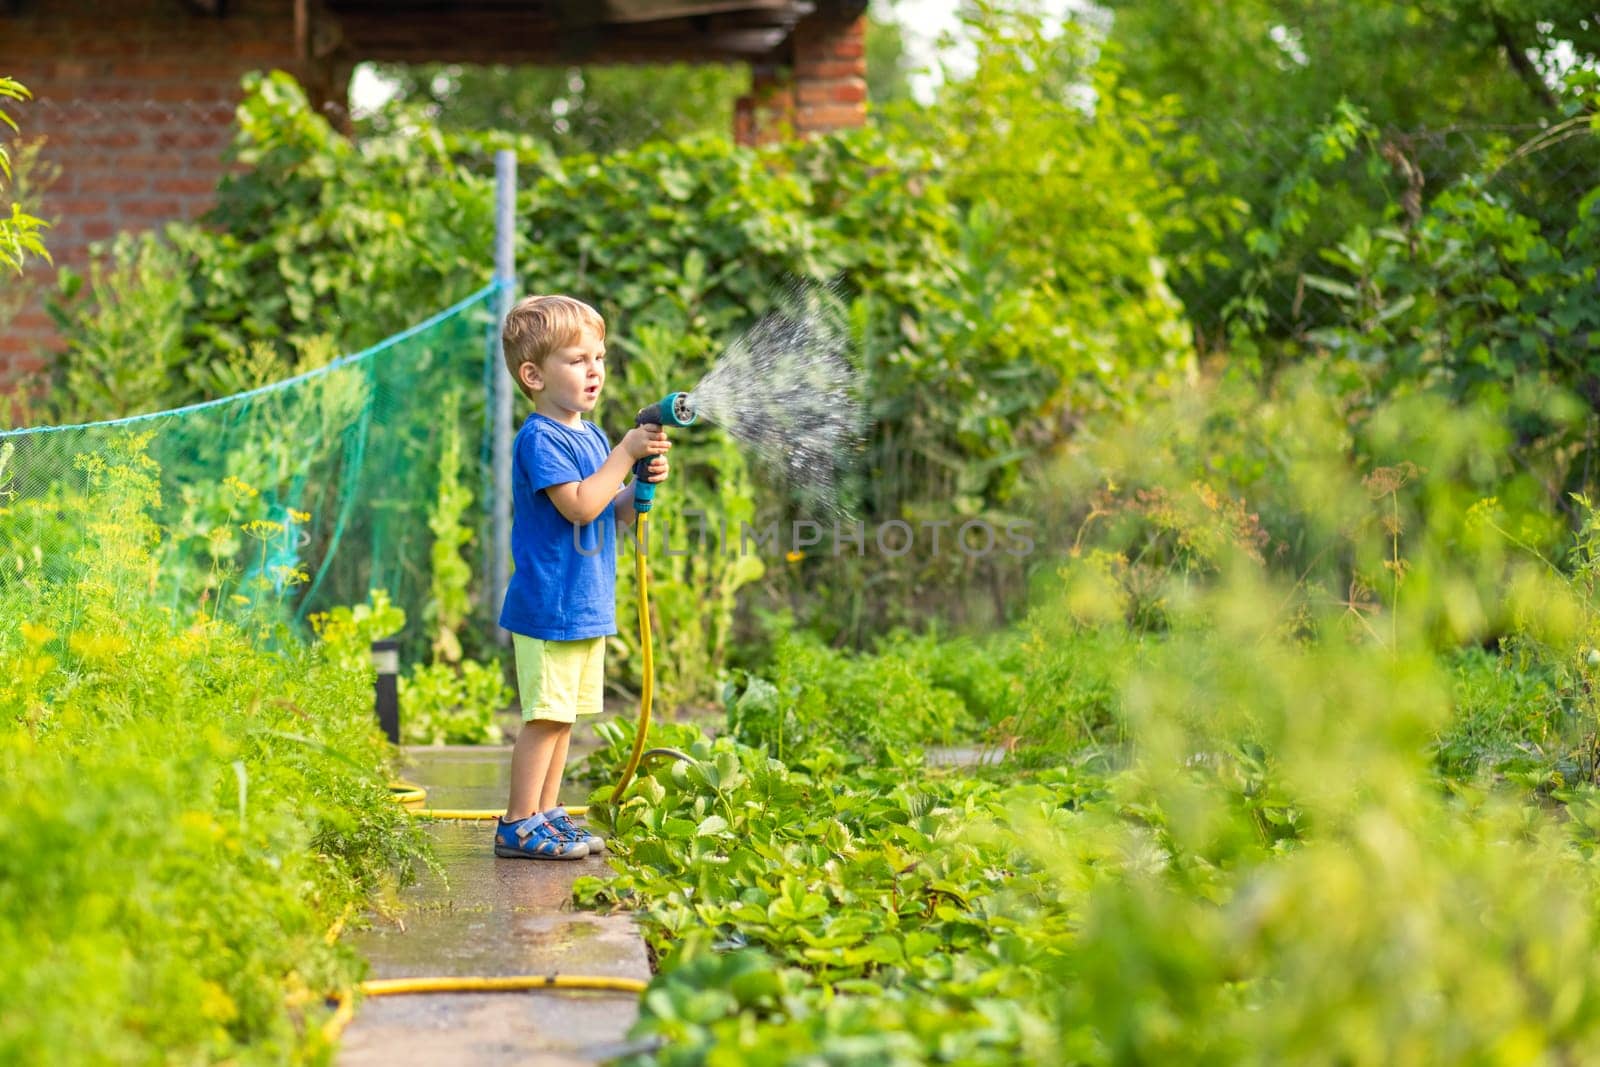 Little child enjoying gardening, watering the plants with a garden hose on a sunny day.